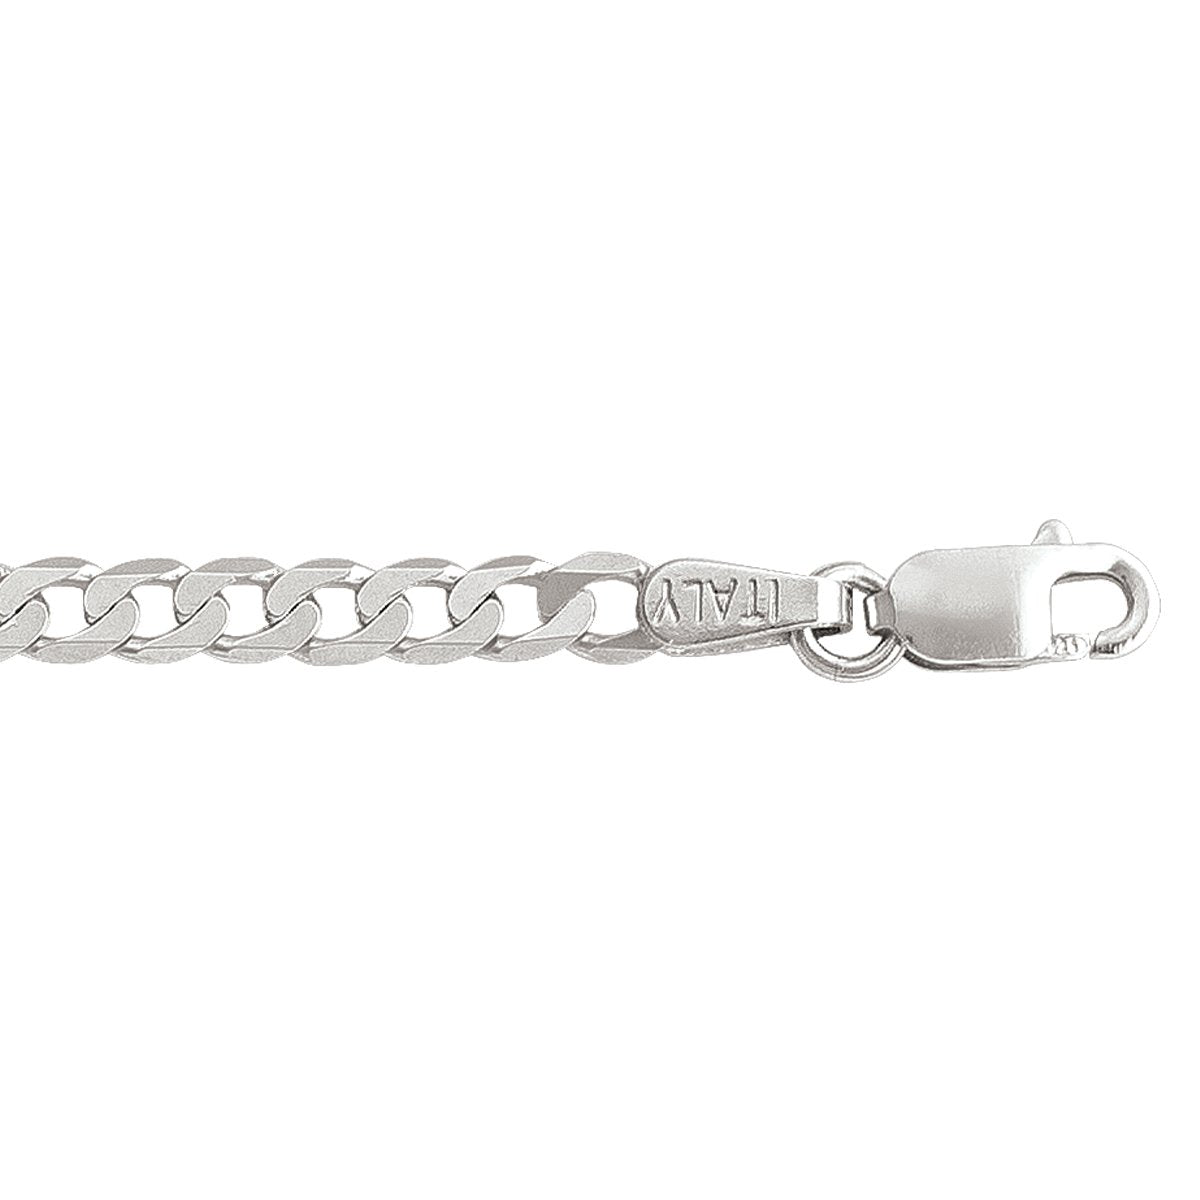 SILVER RHODIUM SOLID OPEN LINK CHAIN